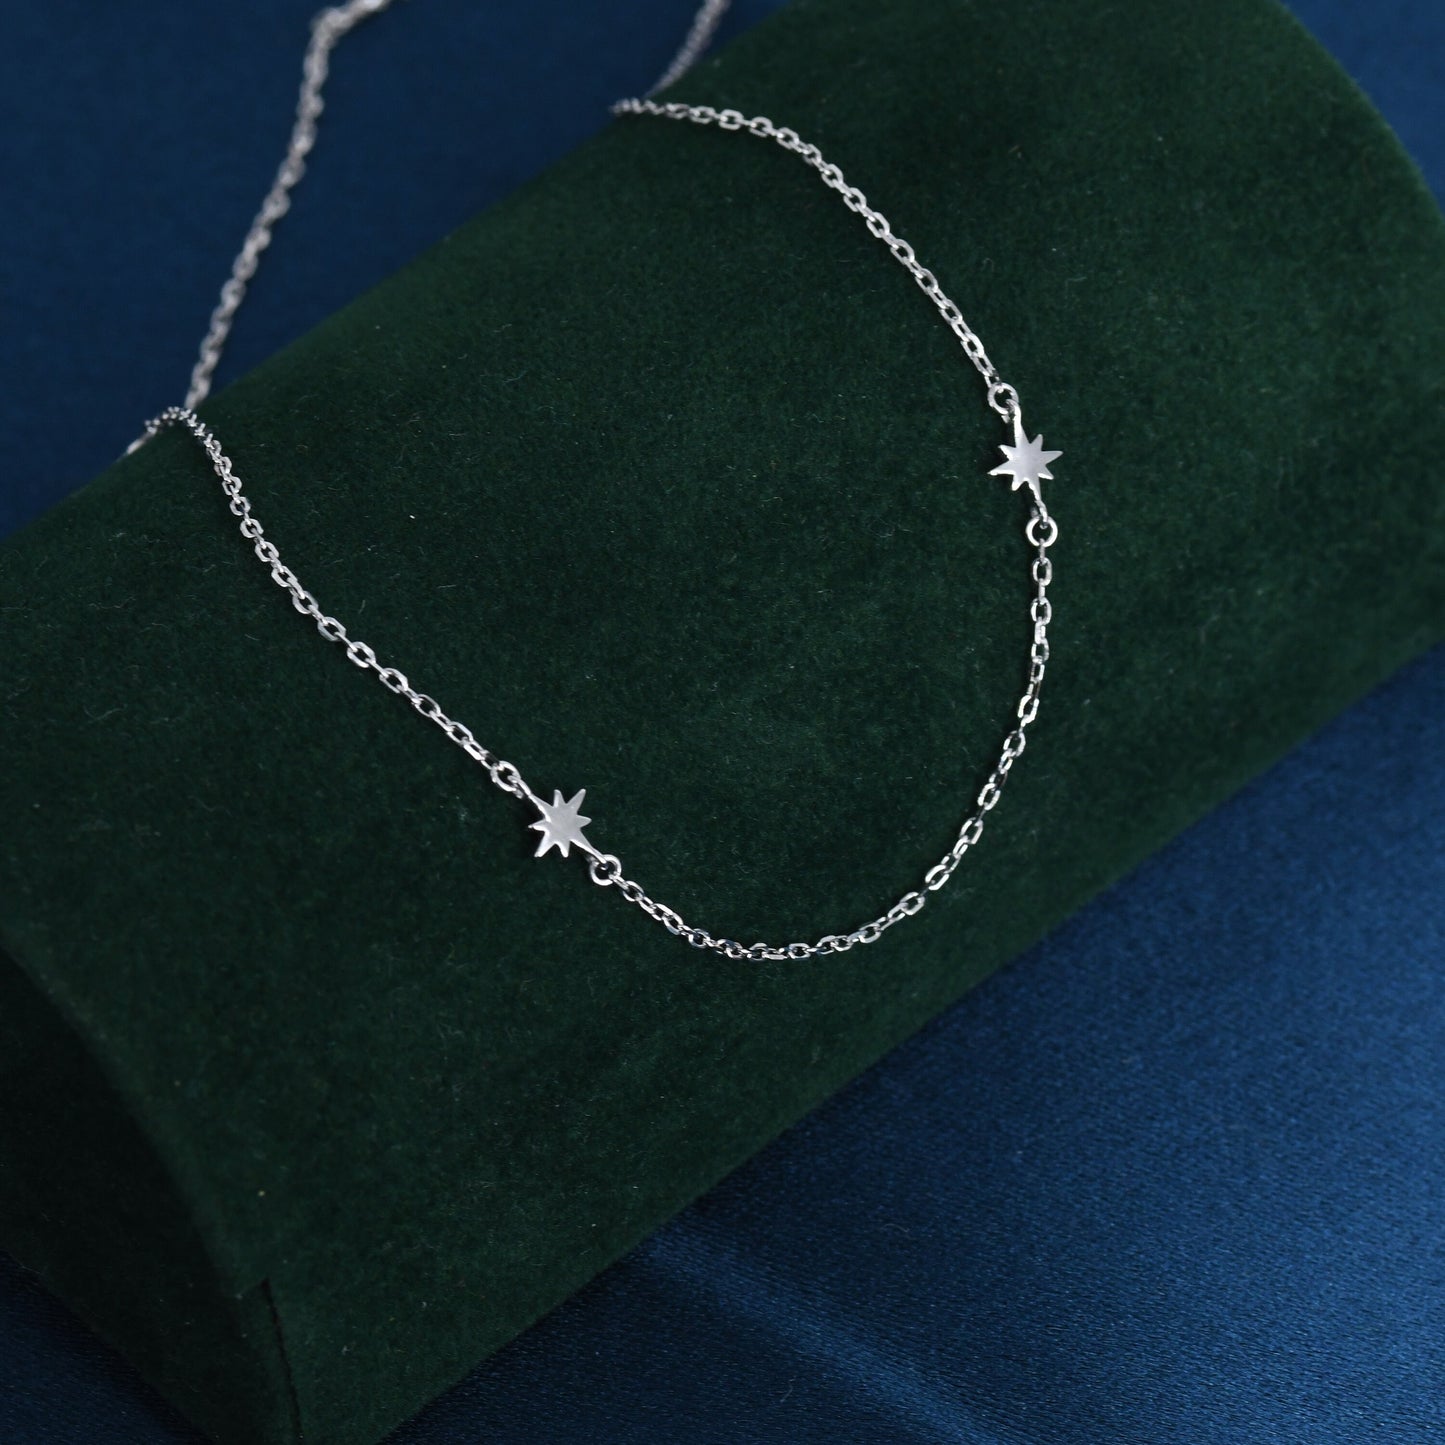 Extra Tiny Starburst Necklace in Sterling Silver, Floating Stars Necklace, Adjustable Length, Extra Small Pendant, 16 inch to 18 inch